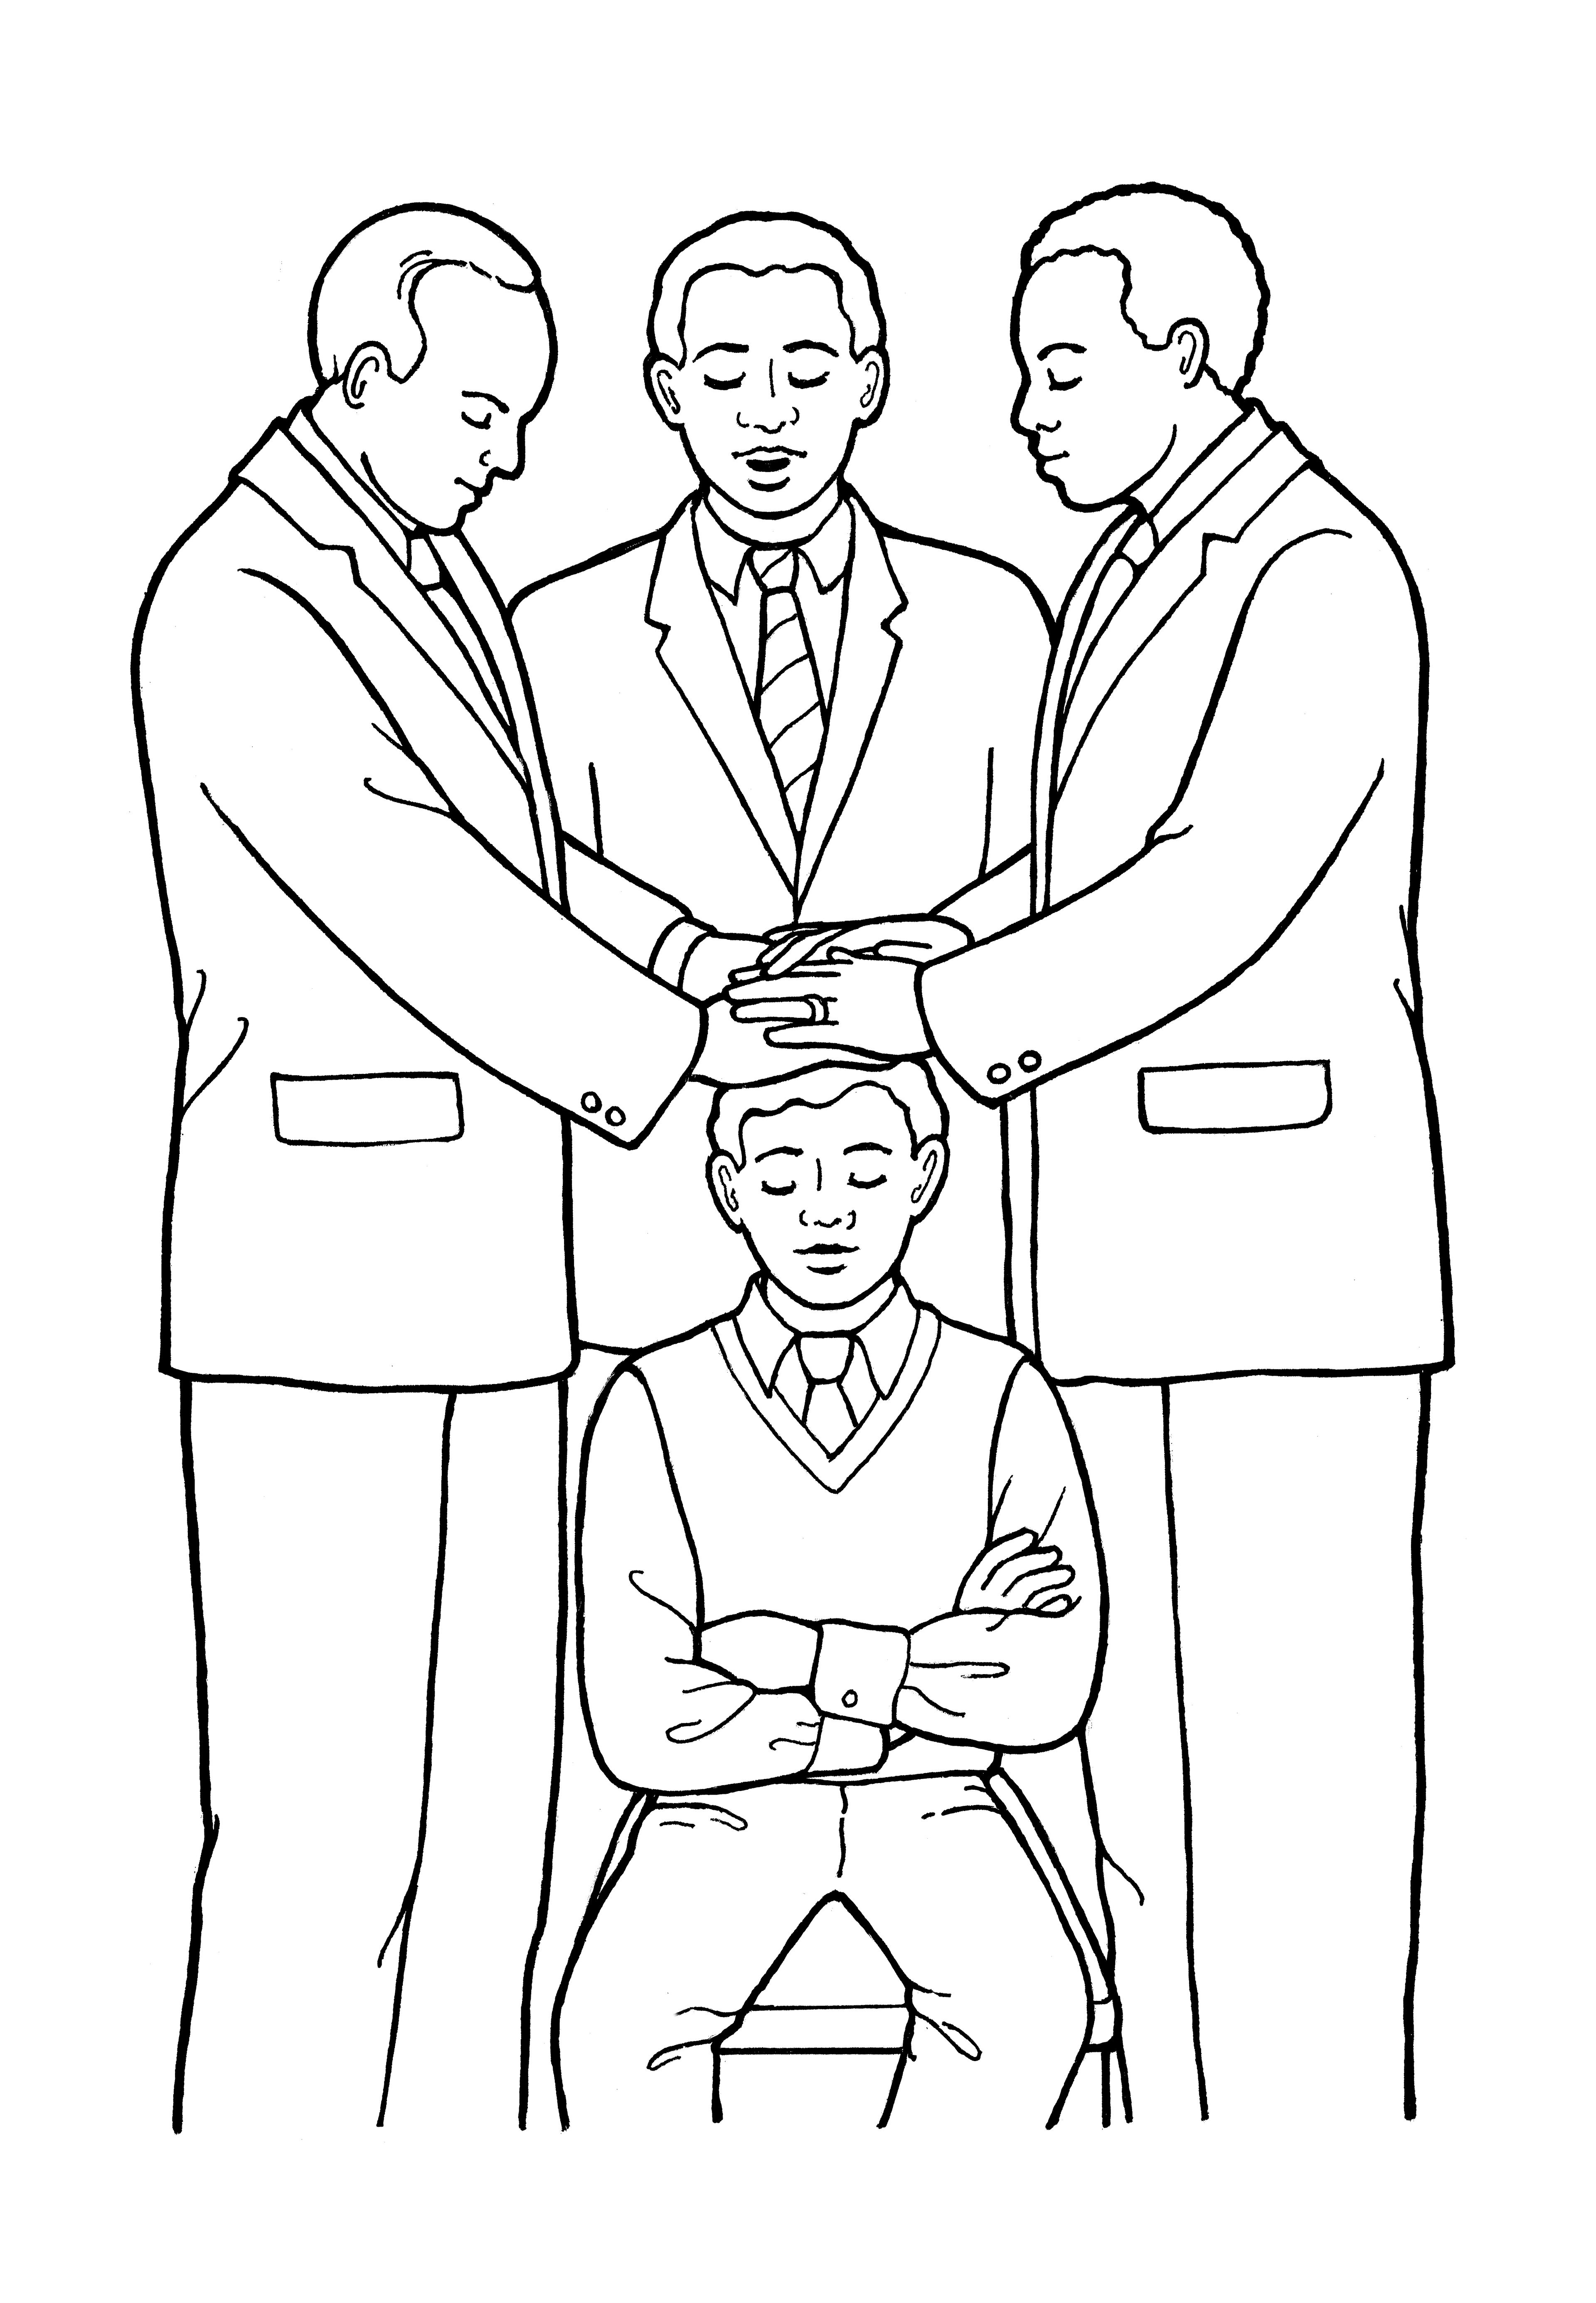 An illustration of the fifth article of faith—“Hands” (a young man being ordained to the priesthood).